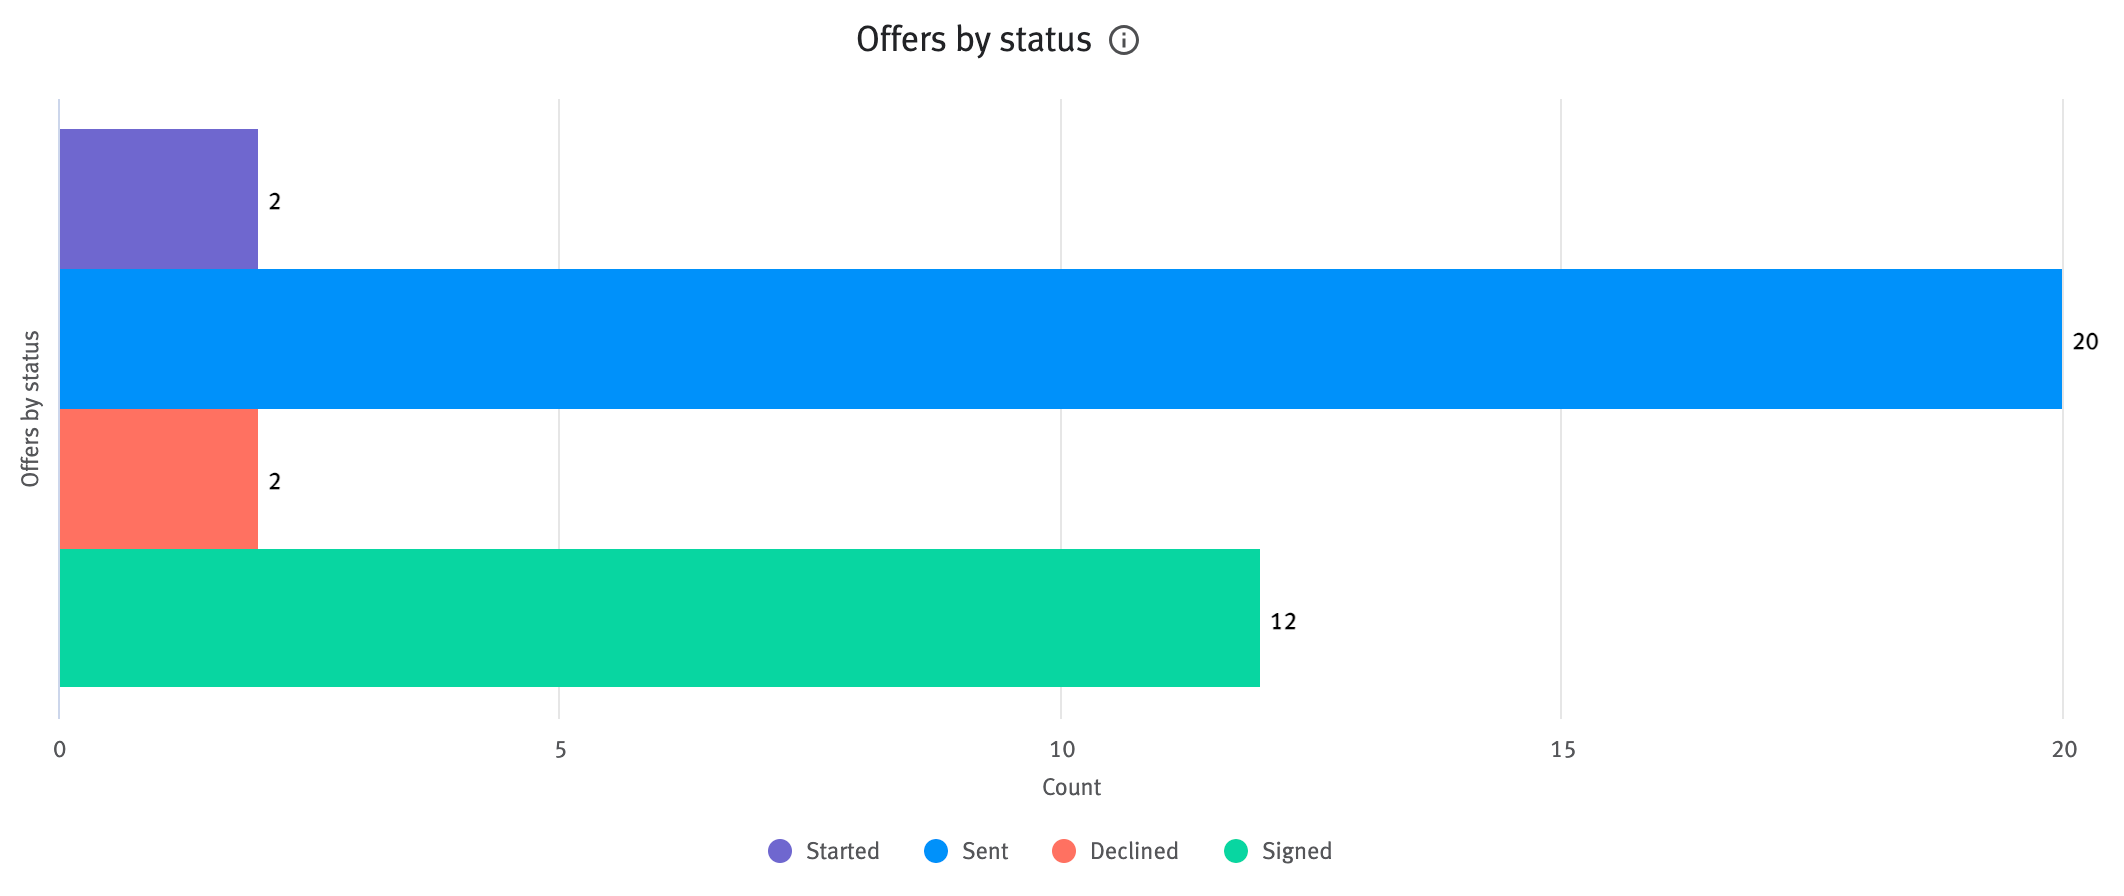 Offers by status chart